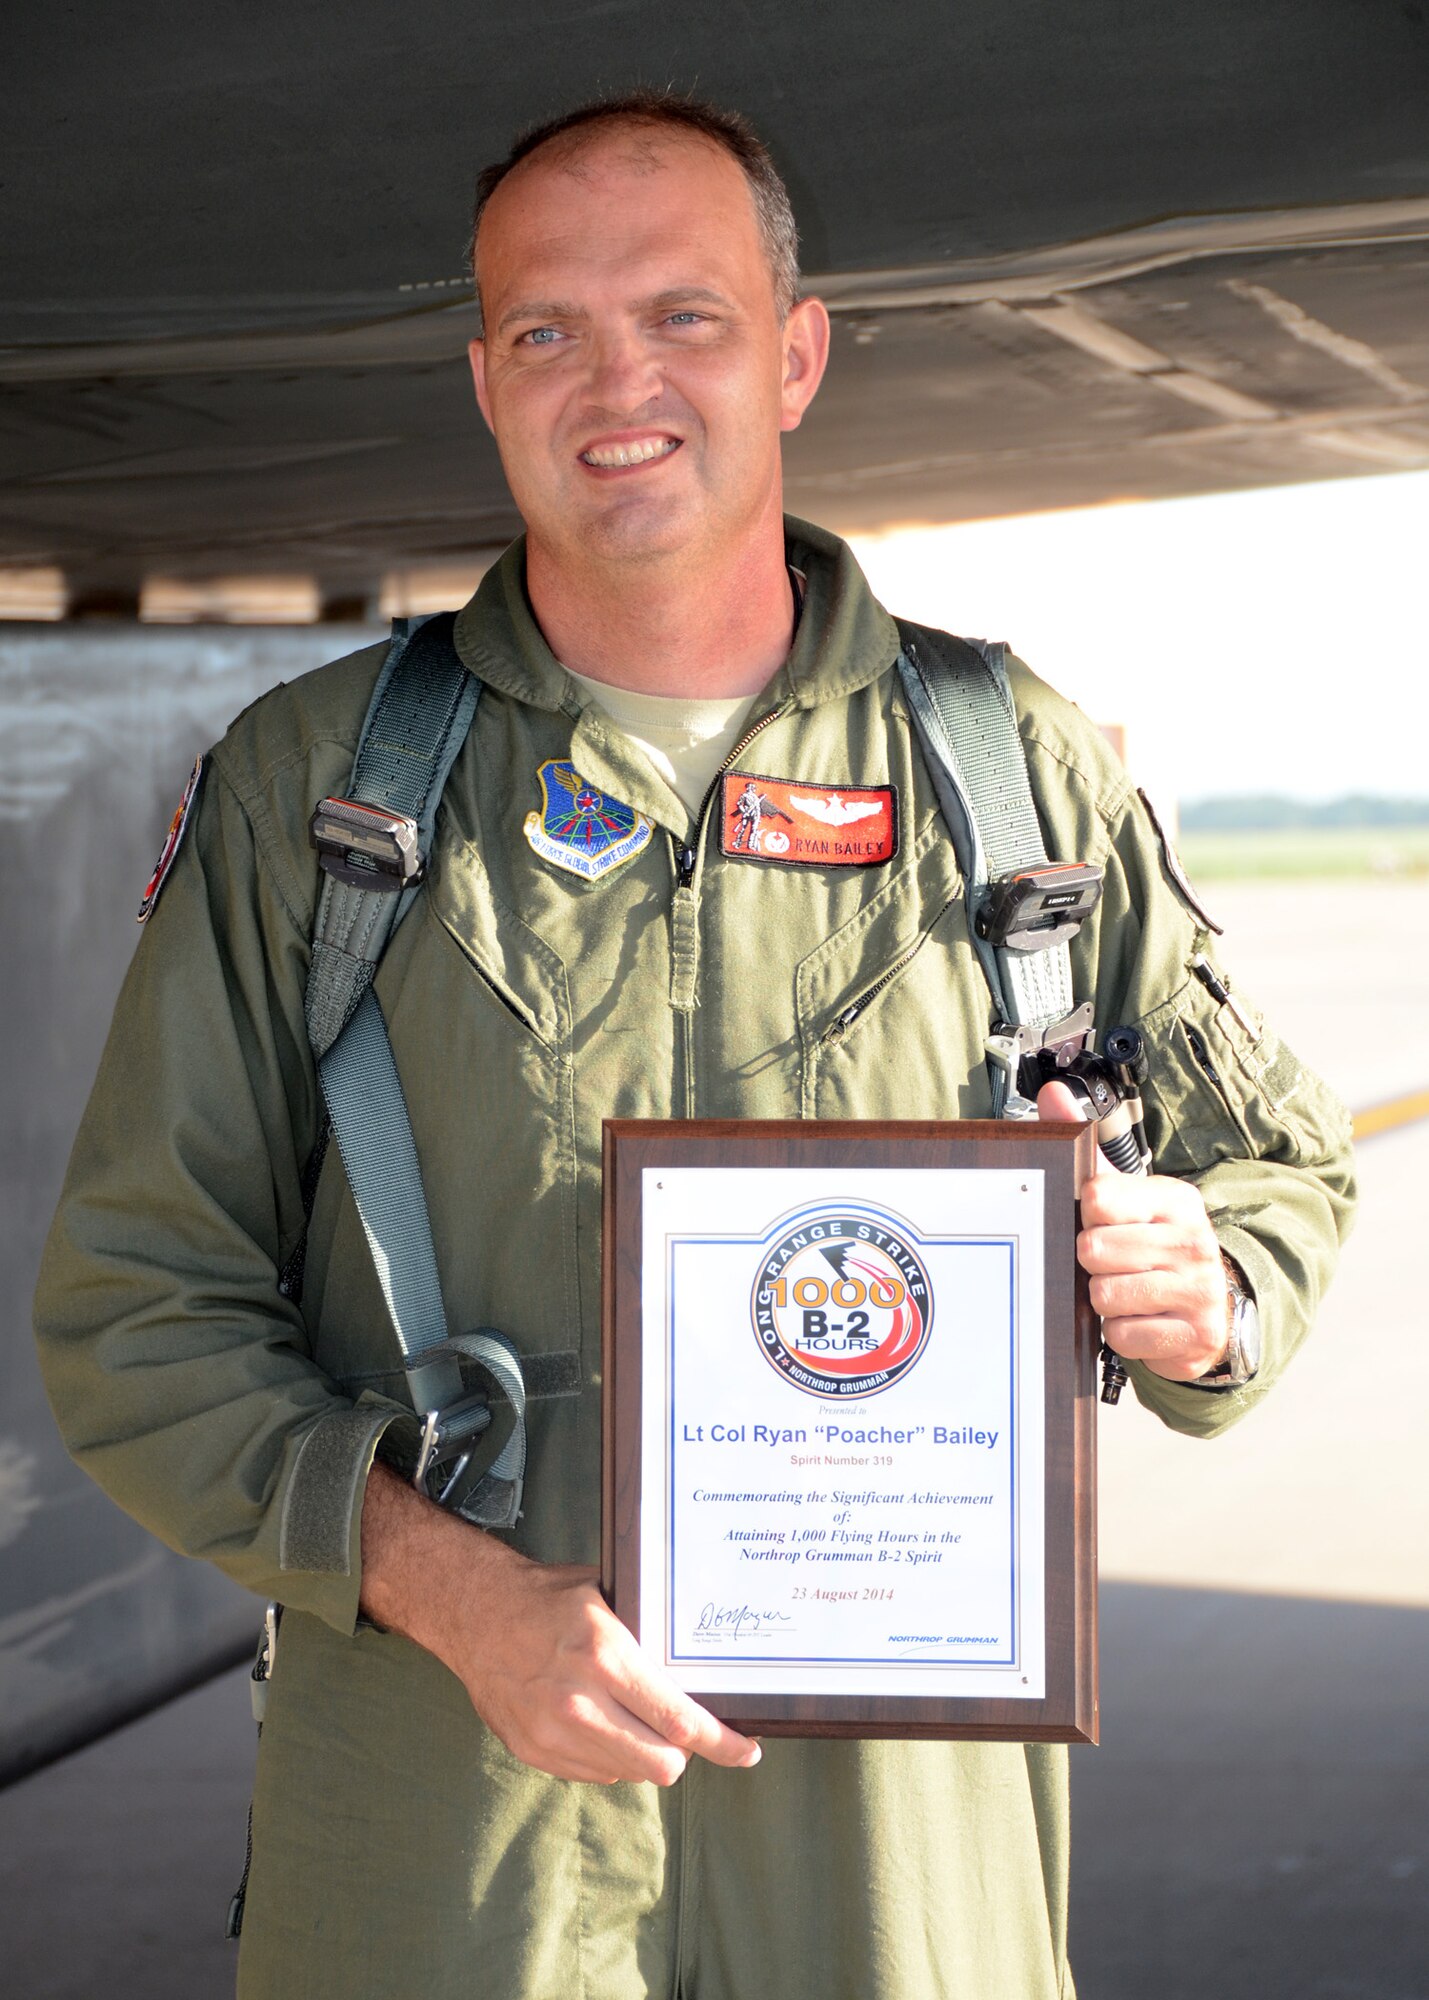 B-2 Spirit pilot Lt. Col. Ryan Bailey, 131st Bomb Wing, Missouri Air National Guard, shows the certificate of achievement recognizing his 1000 flying-hour milestone at the end of a B-2 training mission at Whiteman Air Force Base, August 23, 2014. (U.S. Air National Guard photo by Staff Sgt. Brittany Cannon)